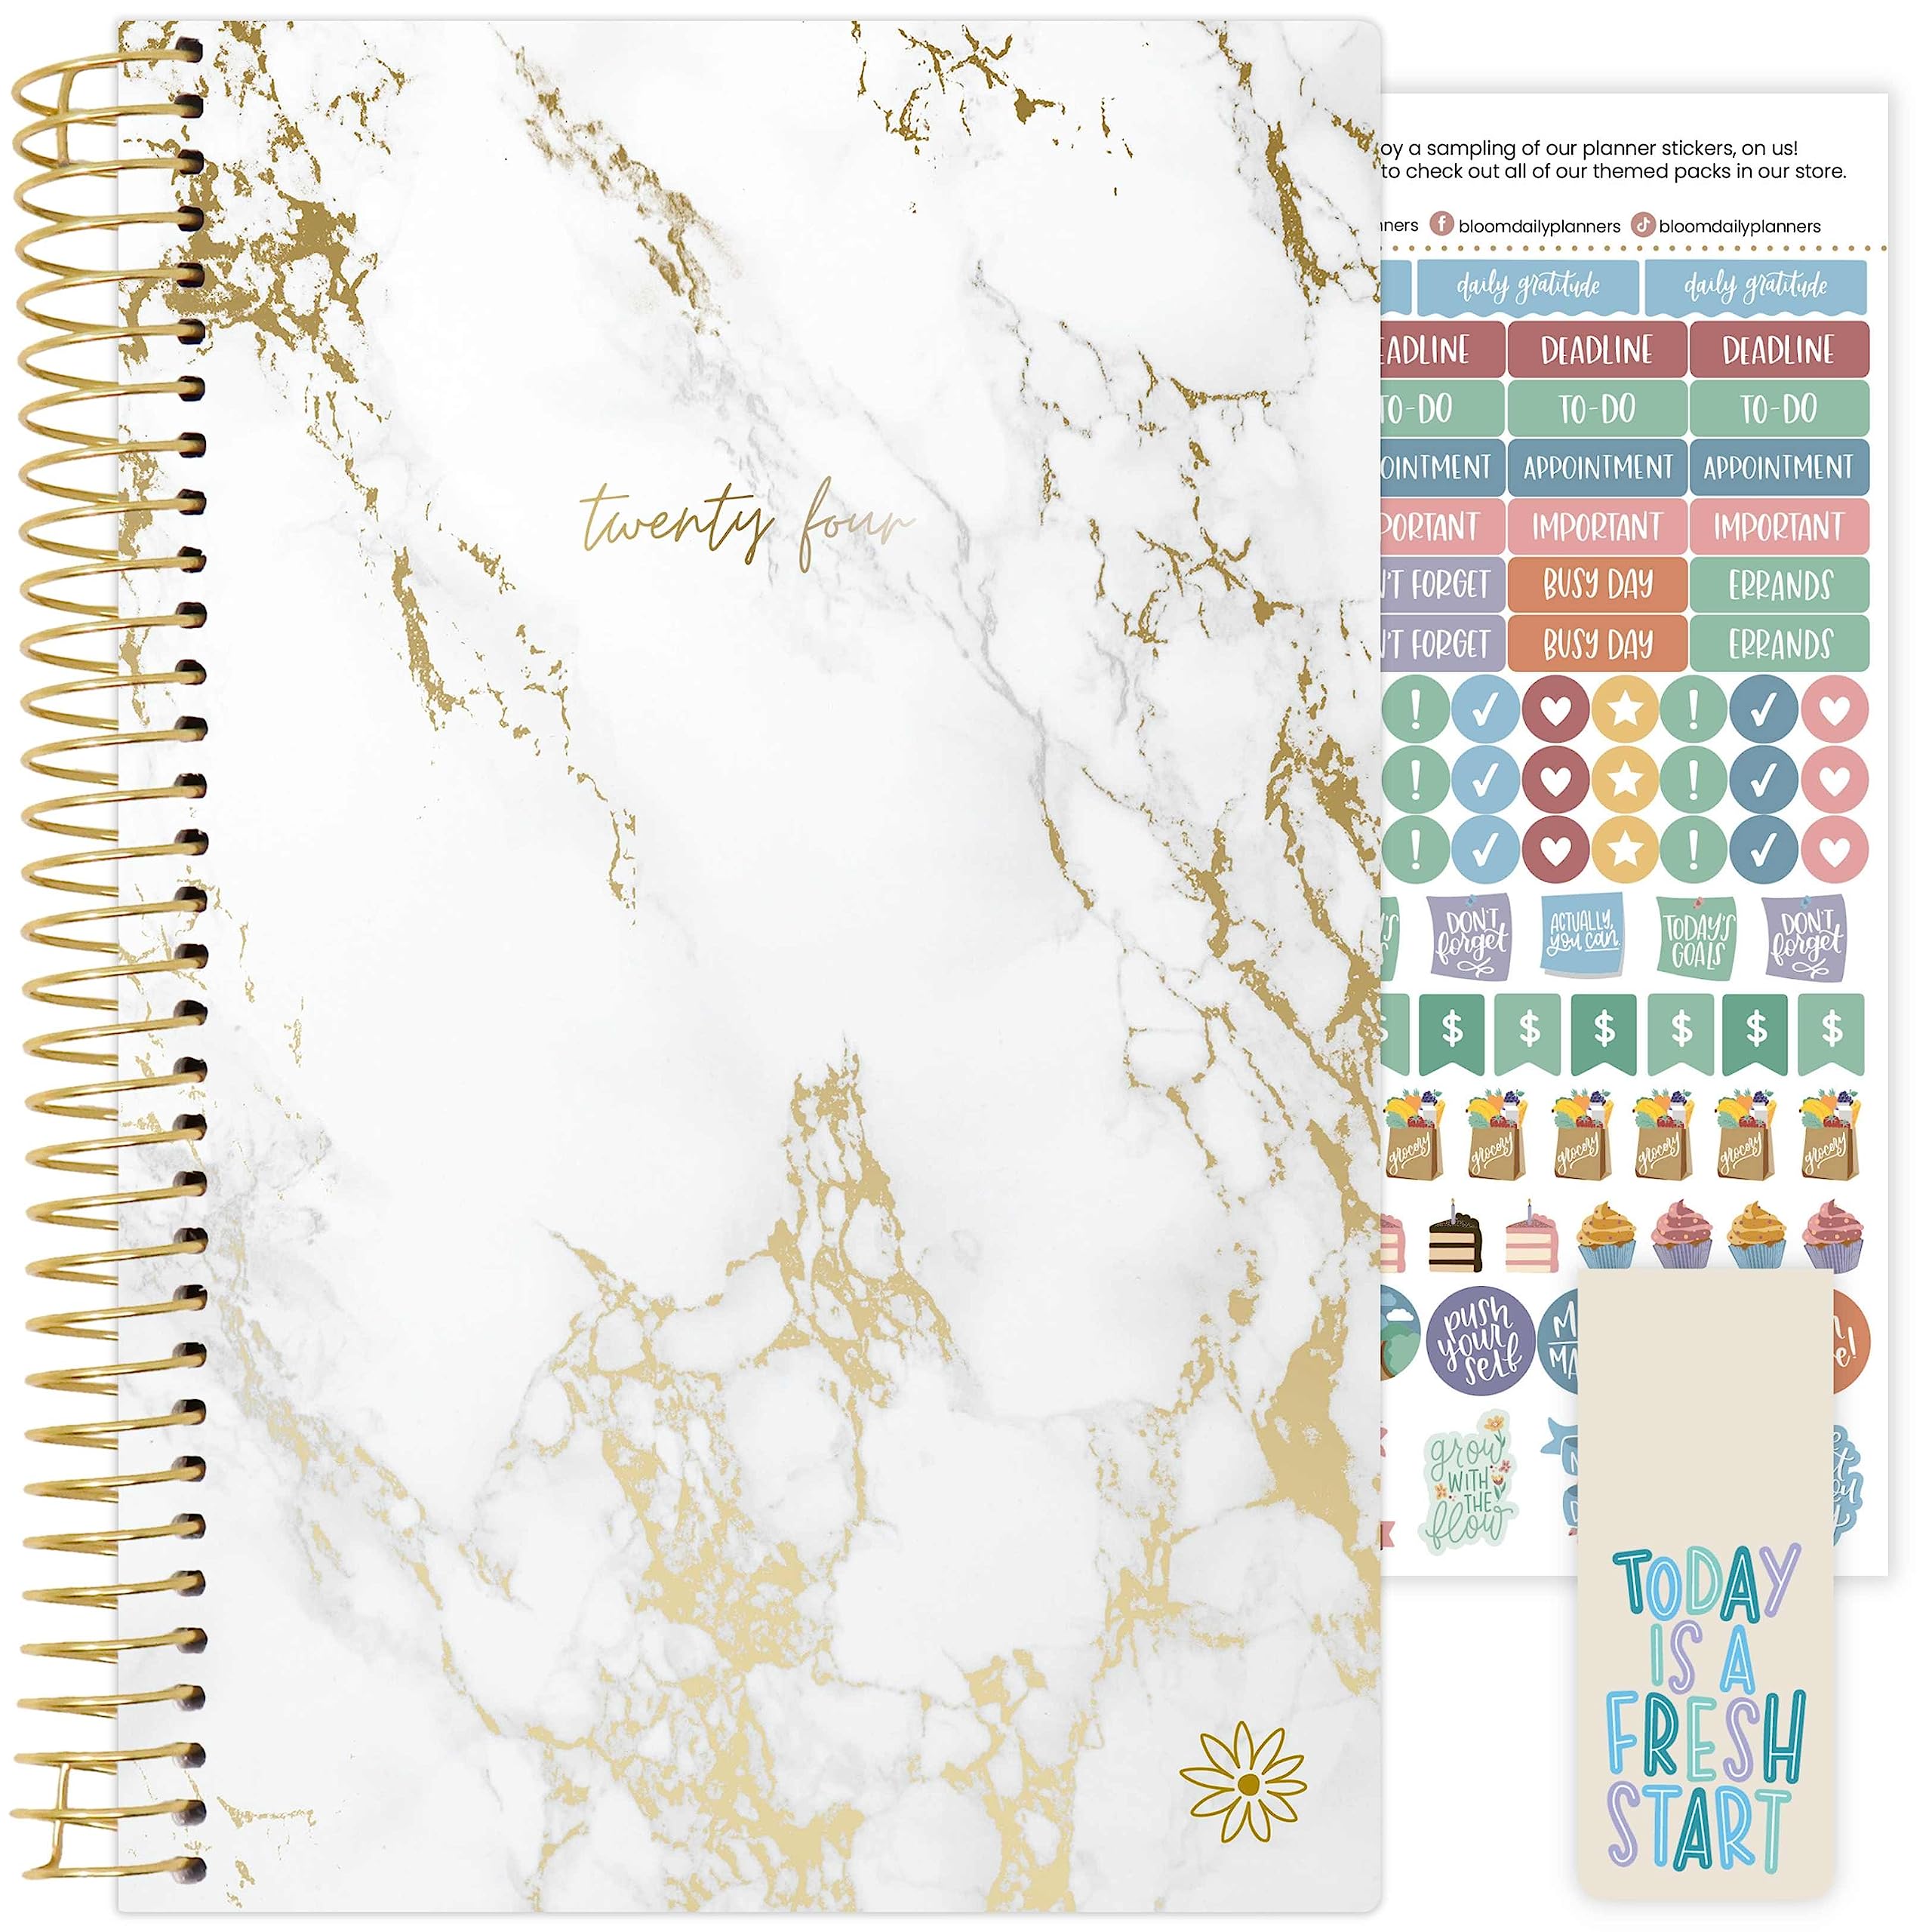 bloom daily planners 2024 Calendar Year Day Planner (January 2024 - December 2024) - 5.5” x 8.25” - Weekly/Monthly Agenda Organizer Book with Stickers & Bookmark - Marble